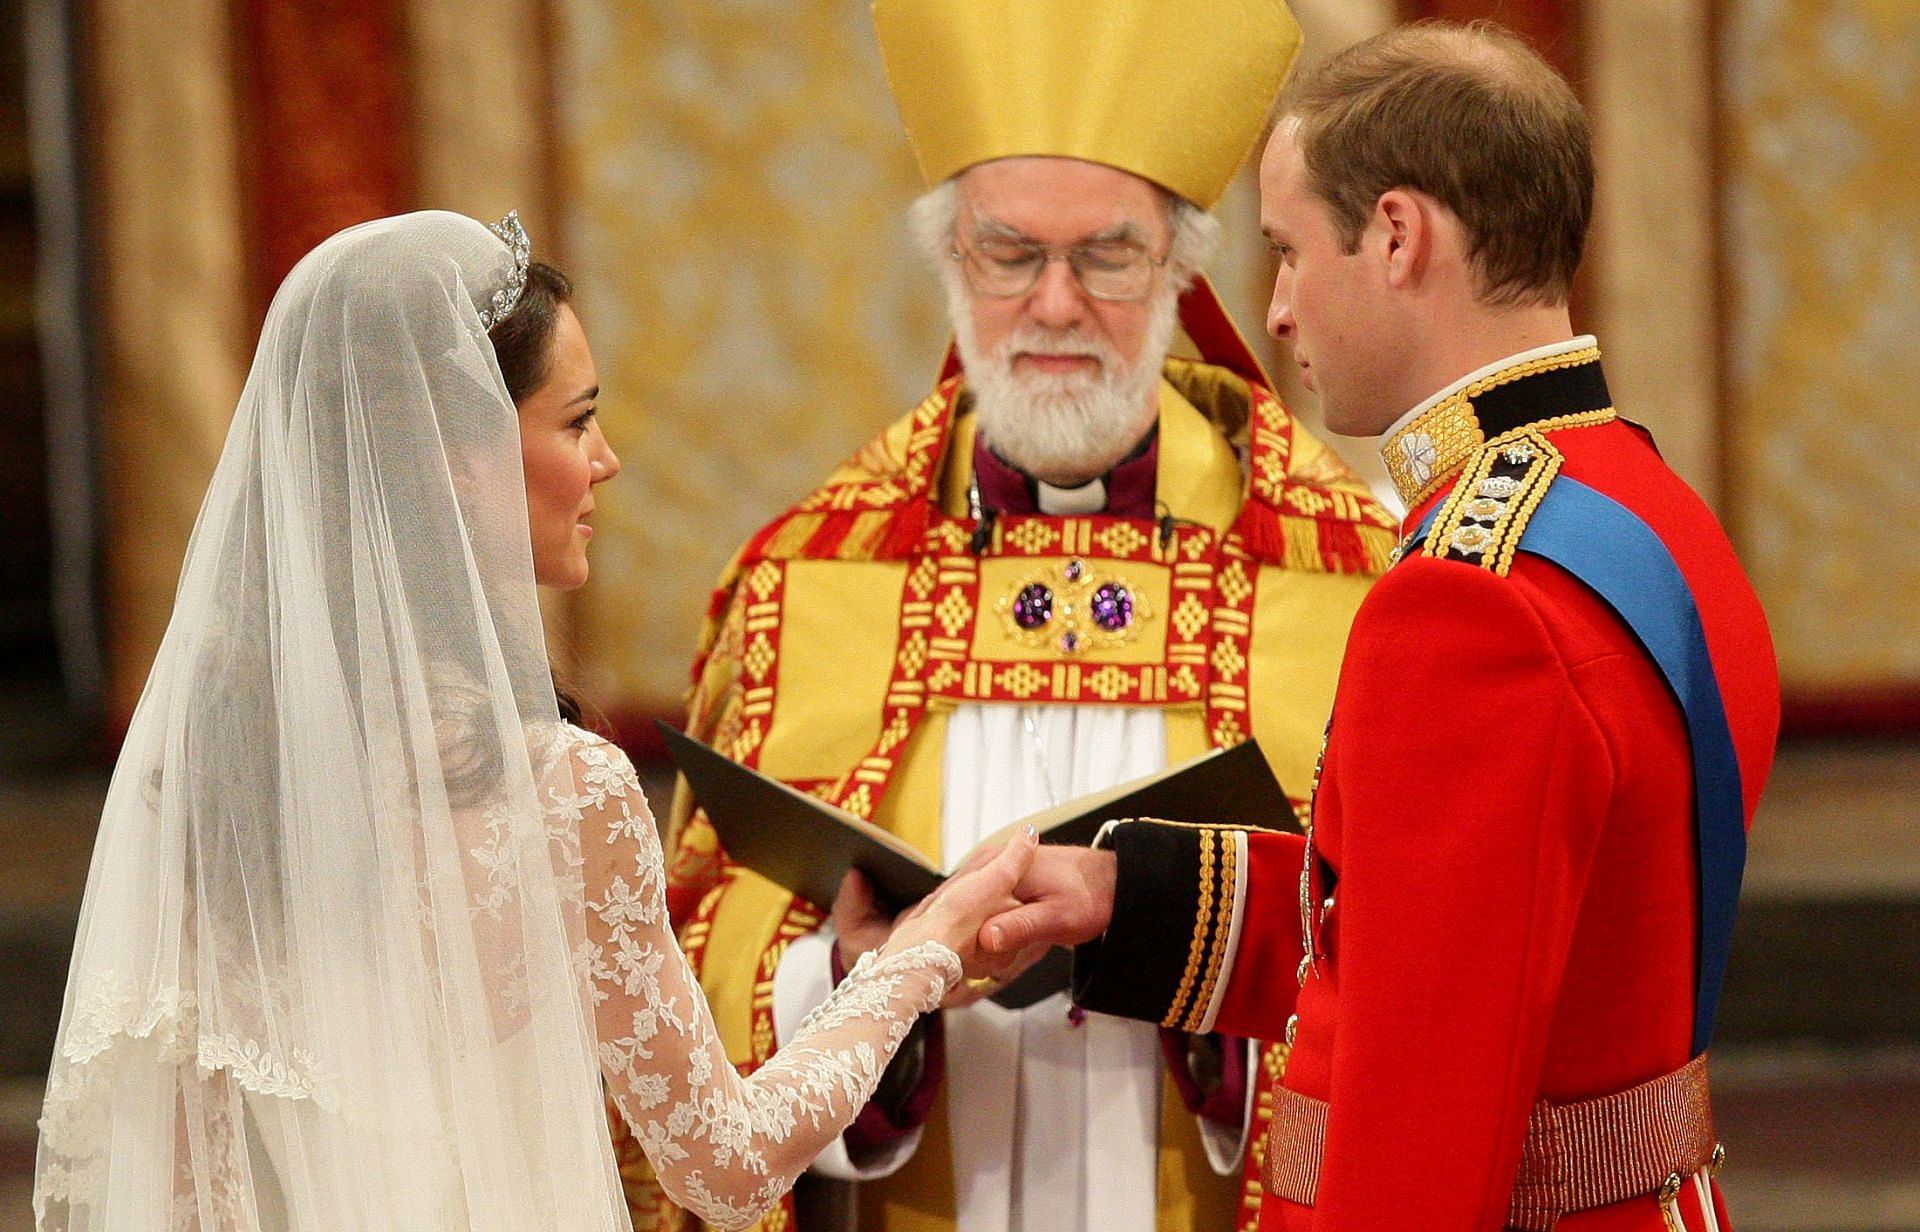 Prince William and Catherine Middleton take their vows during their Royal wedding ceremony at Westminster Abbey (Source: Getty)